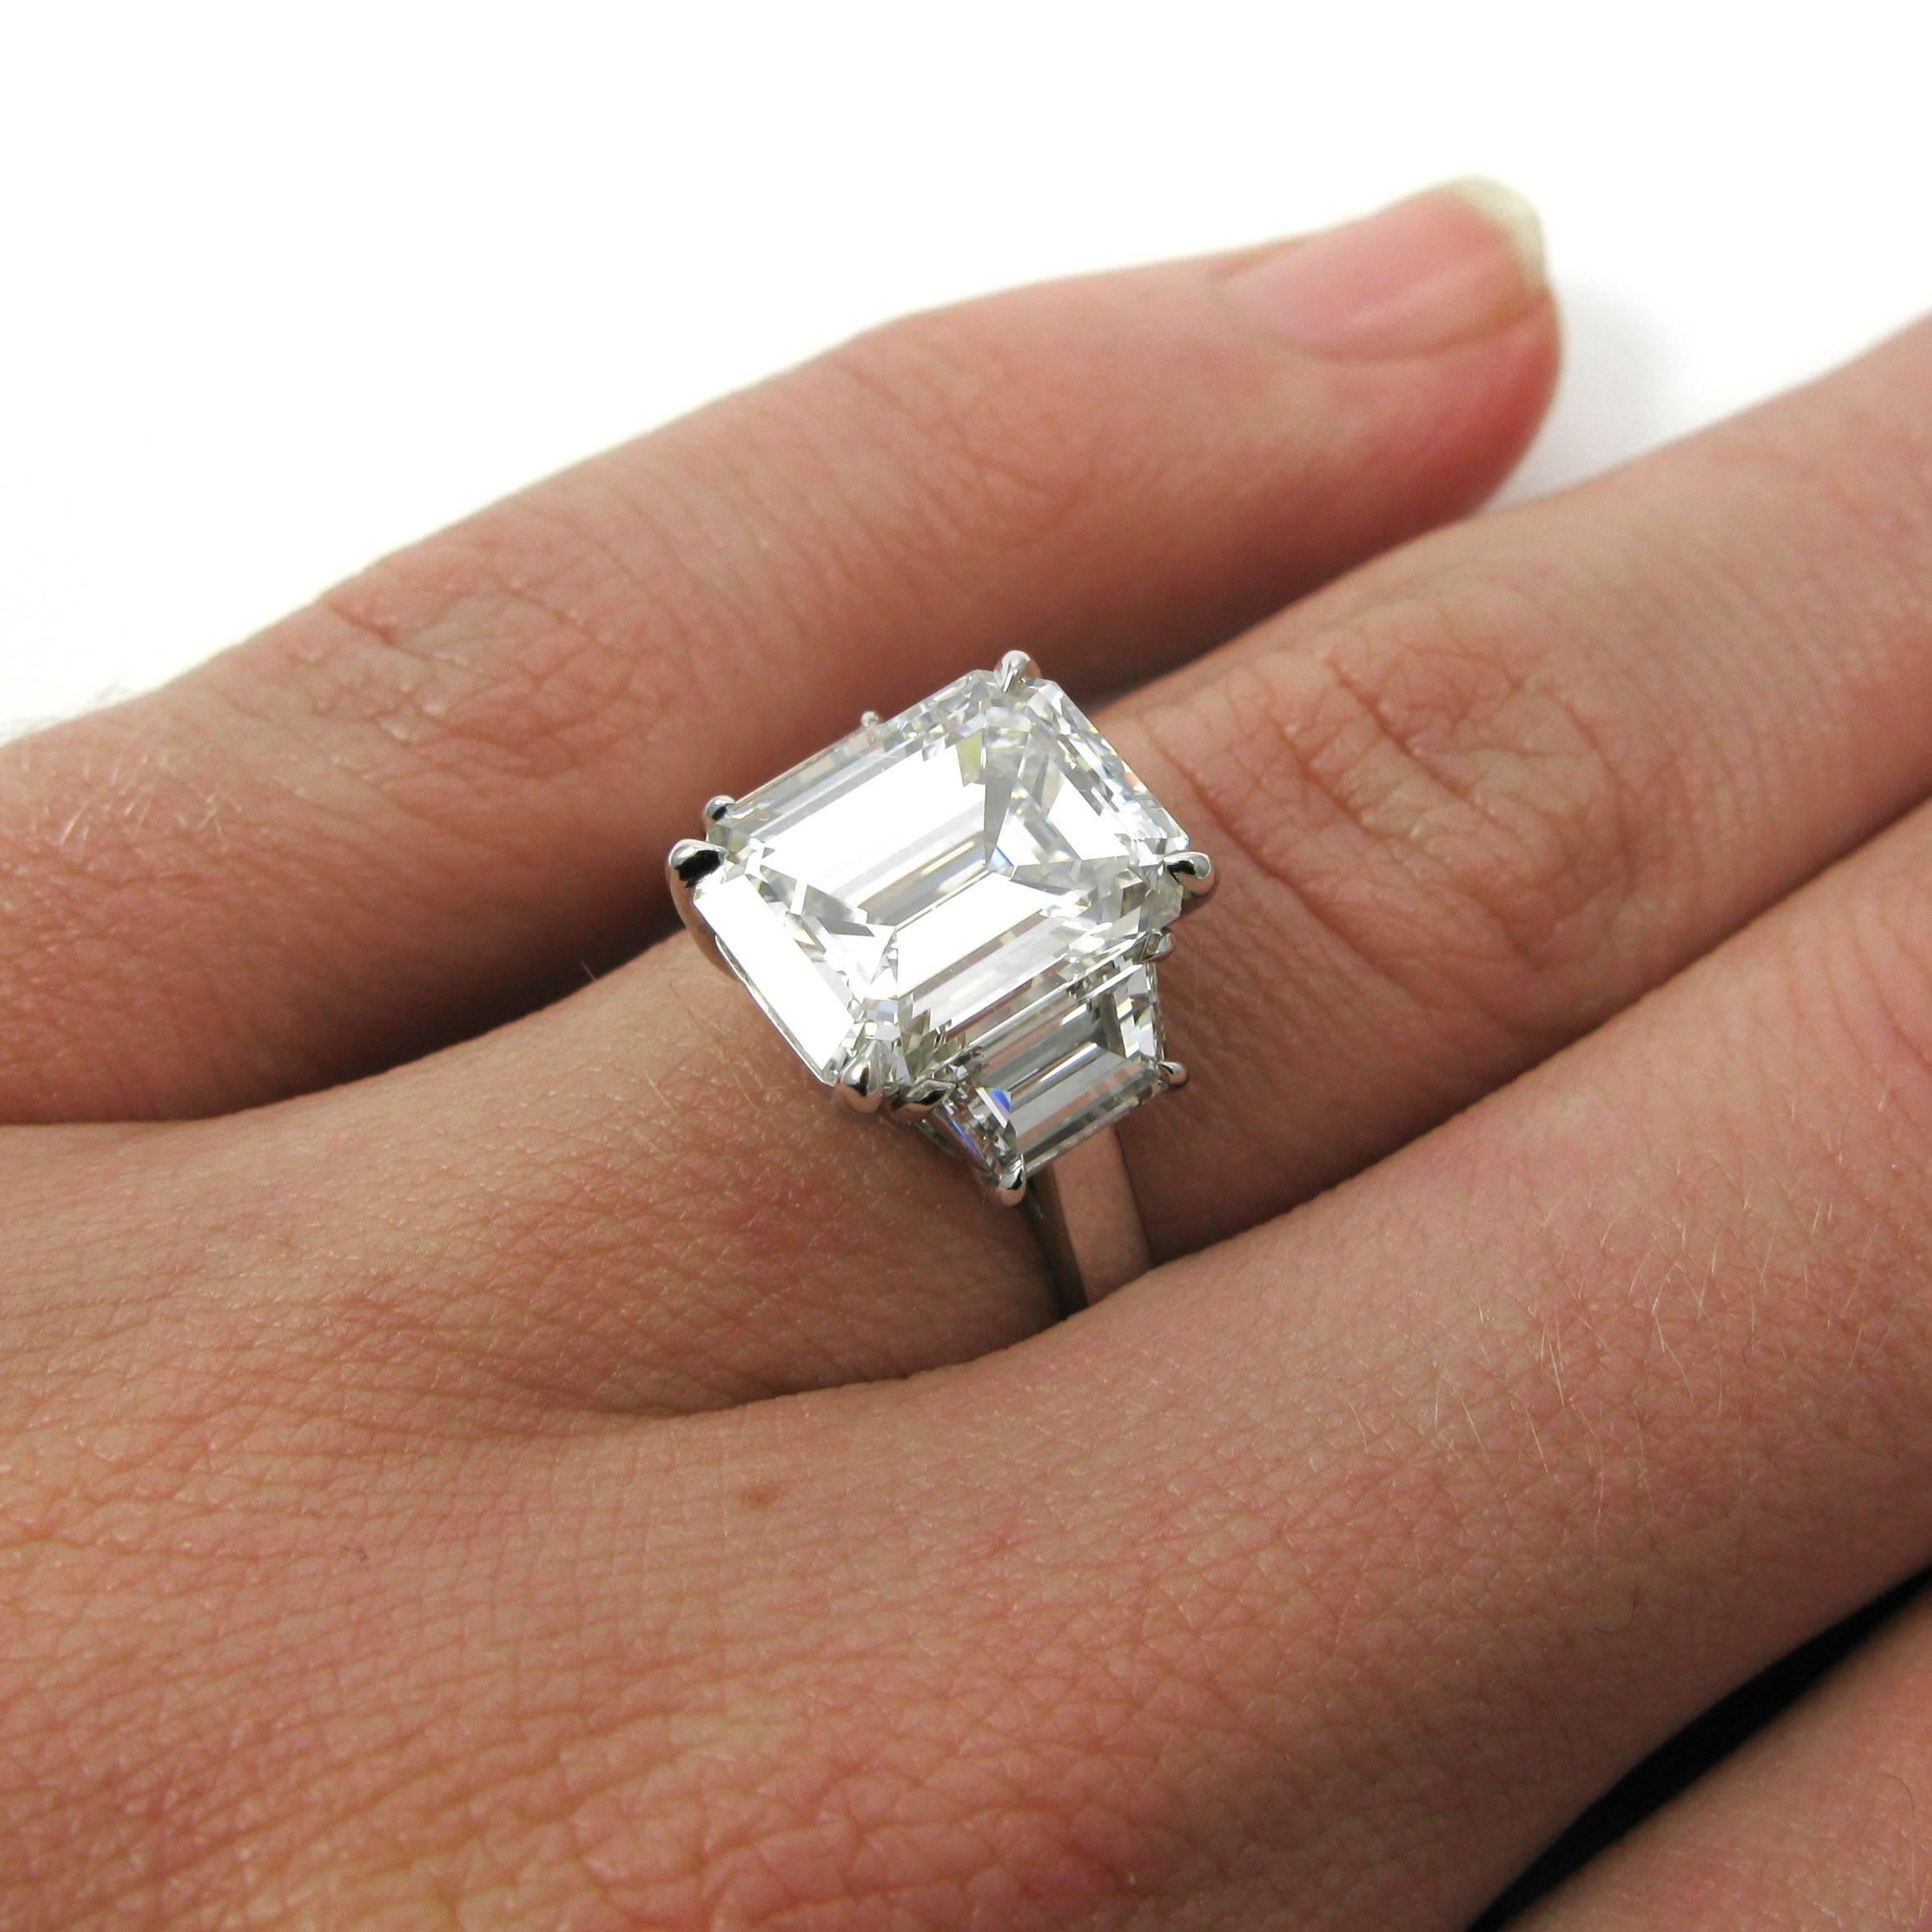 A GIA certified 4.77 carat emerald cut with I color and SI1 clarity is flanked by two trapezoid-cut diamonds totaling approx. 1.40 carats in this simple yet lovely platinum three stone ring. 

Purchase includes GIA Diamond Grading Report #5161038446